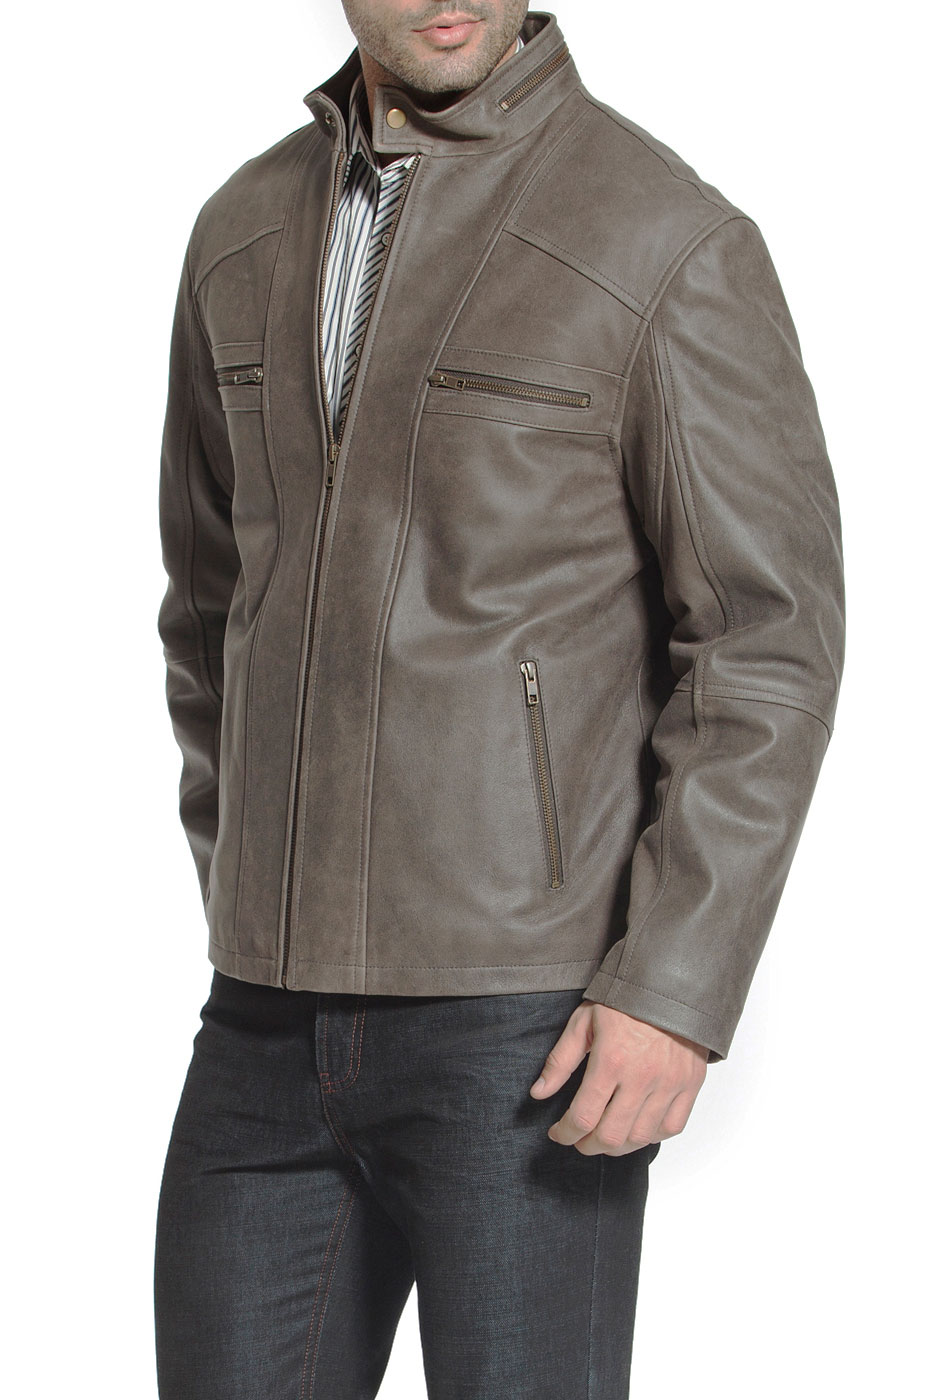 BGSD Men's Ethan Distressed Leather Motorcycle Jacket